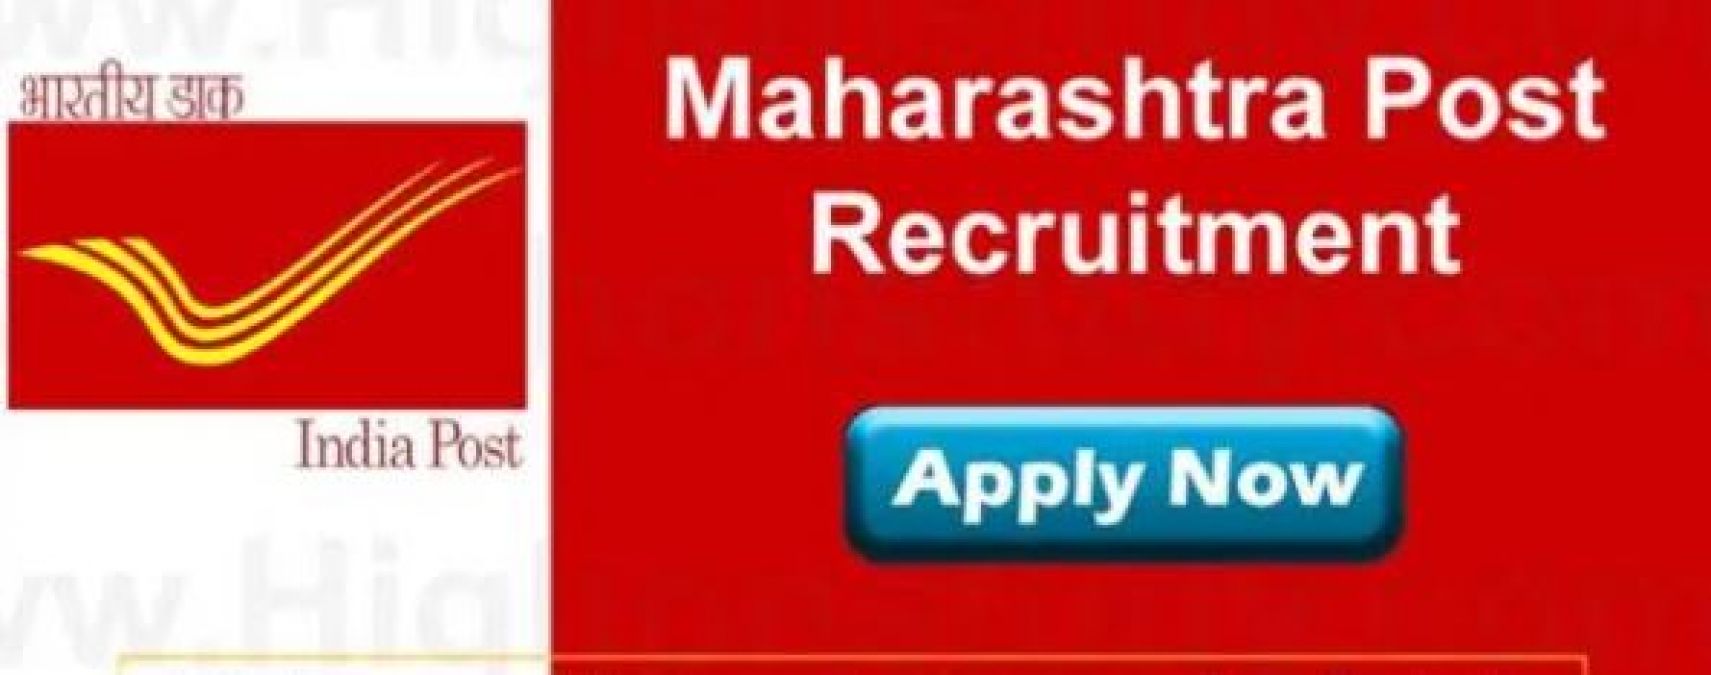 Recruitment in Indian Postal Department, Know how to apply